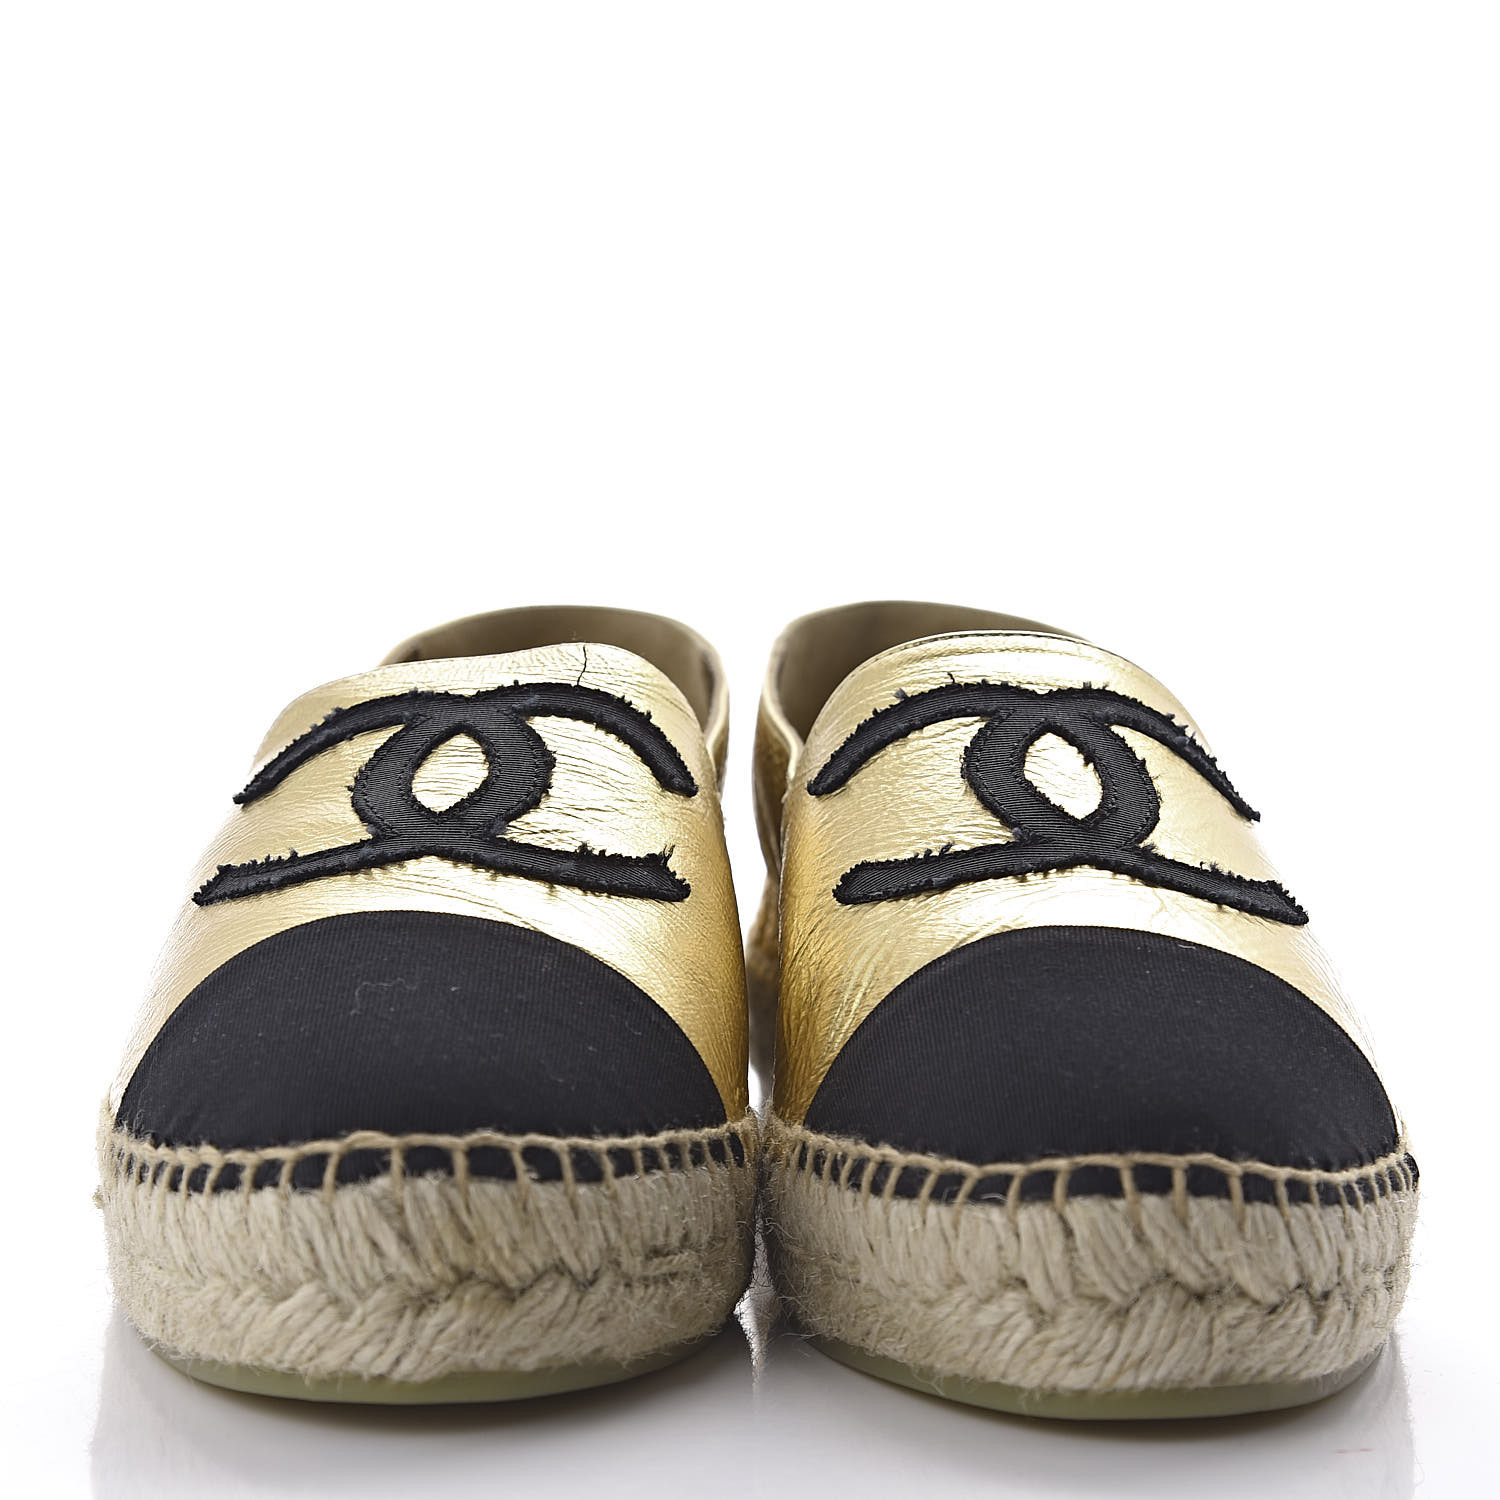 chanel espadrilles gold and black